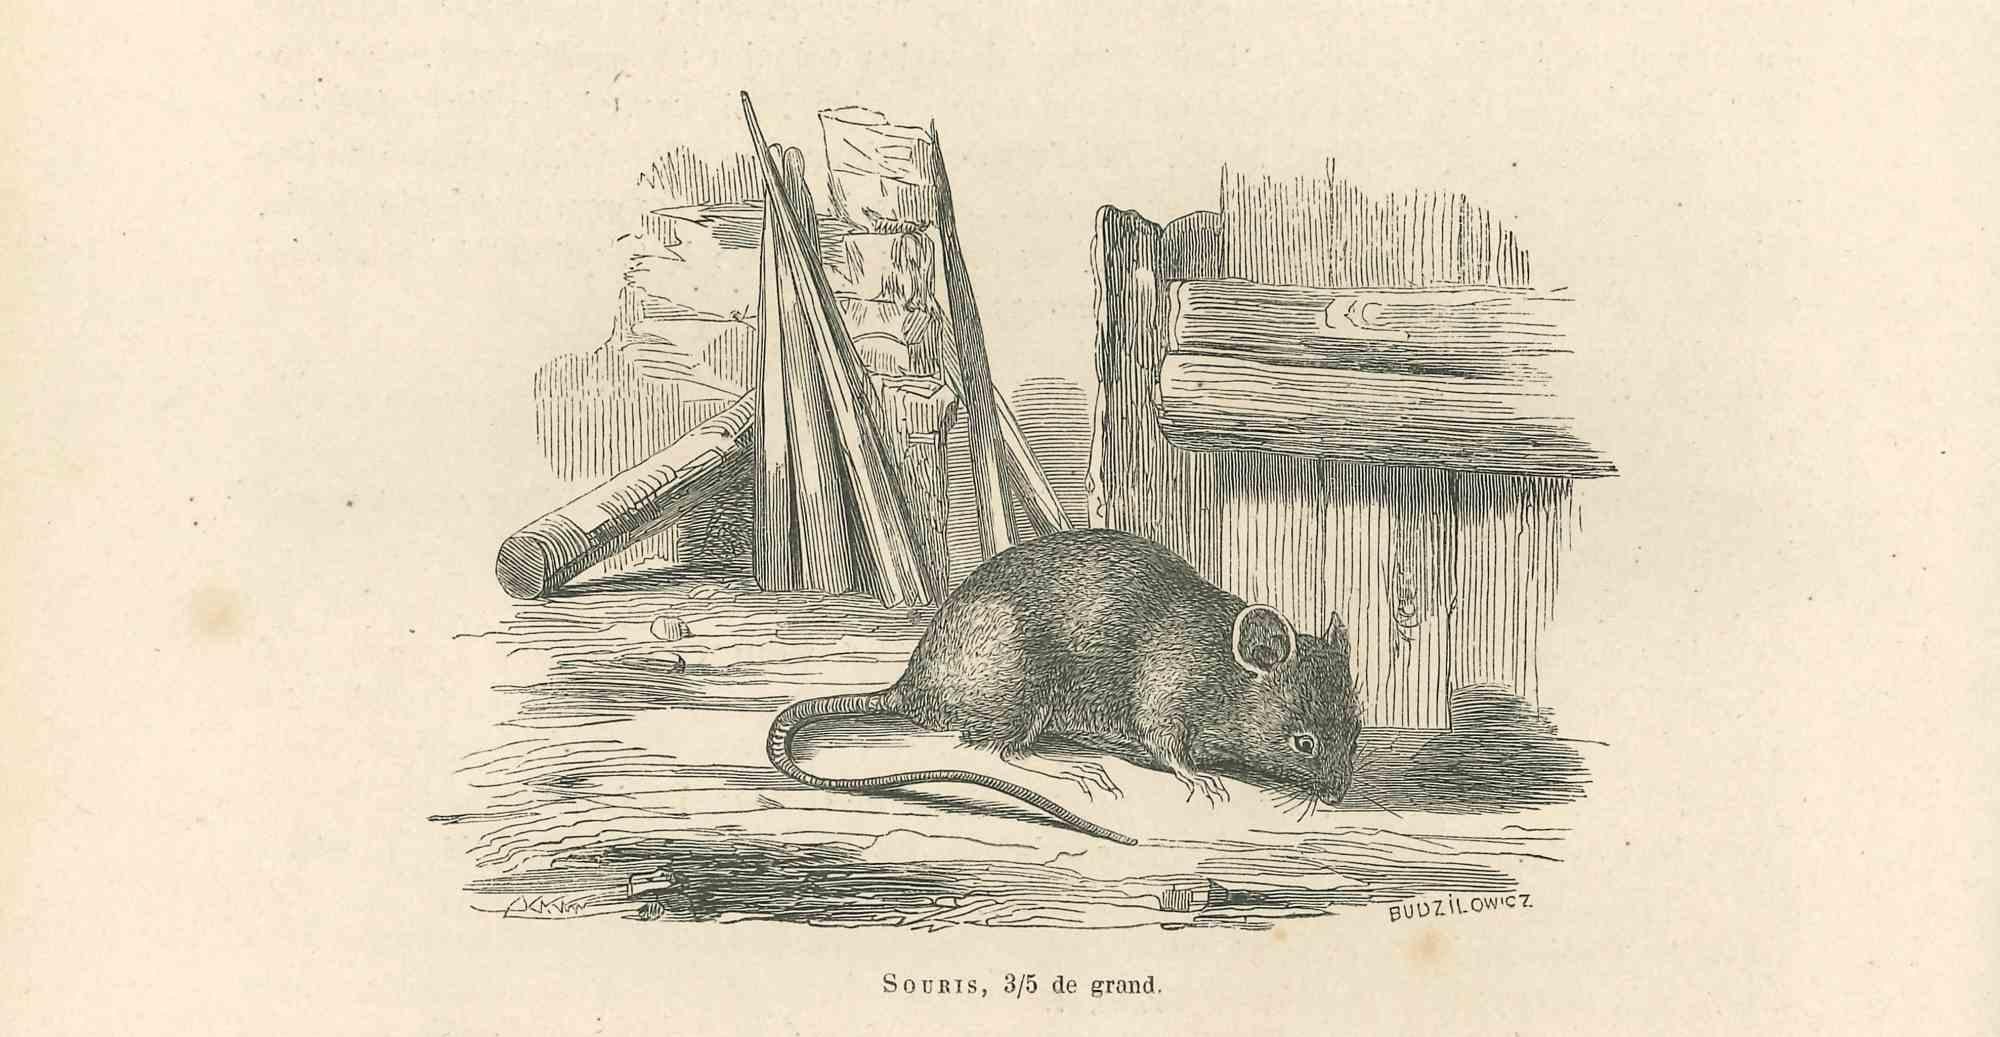 The Mouse is an original lithograph on ivory-colored paper, realized by Paul Gervais (1816-1879). The artwork is from The Series of "Les Trois Règnes de la Nature", and was published in 1854.

Good conditions.

Titled on the lower.

The series of